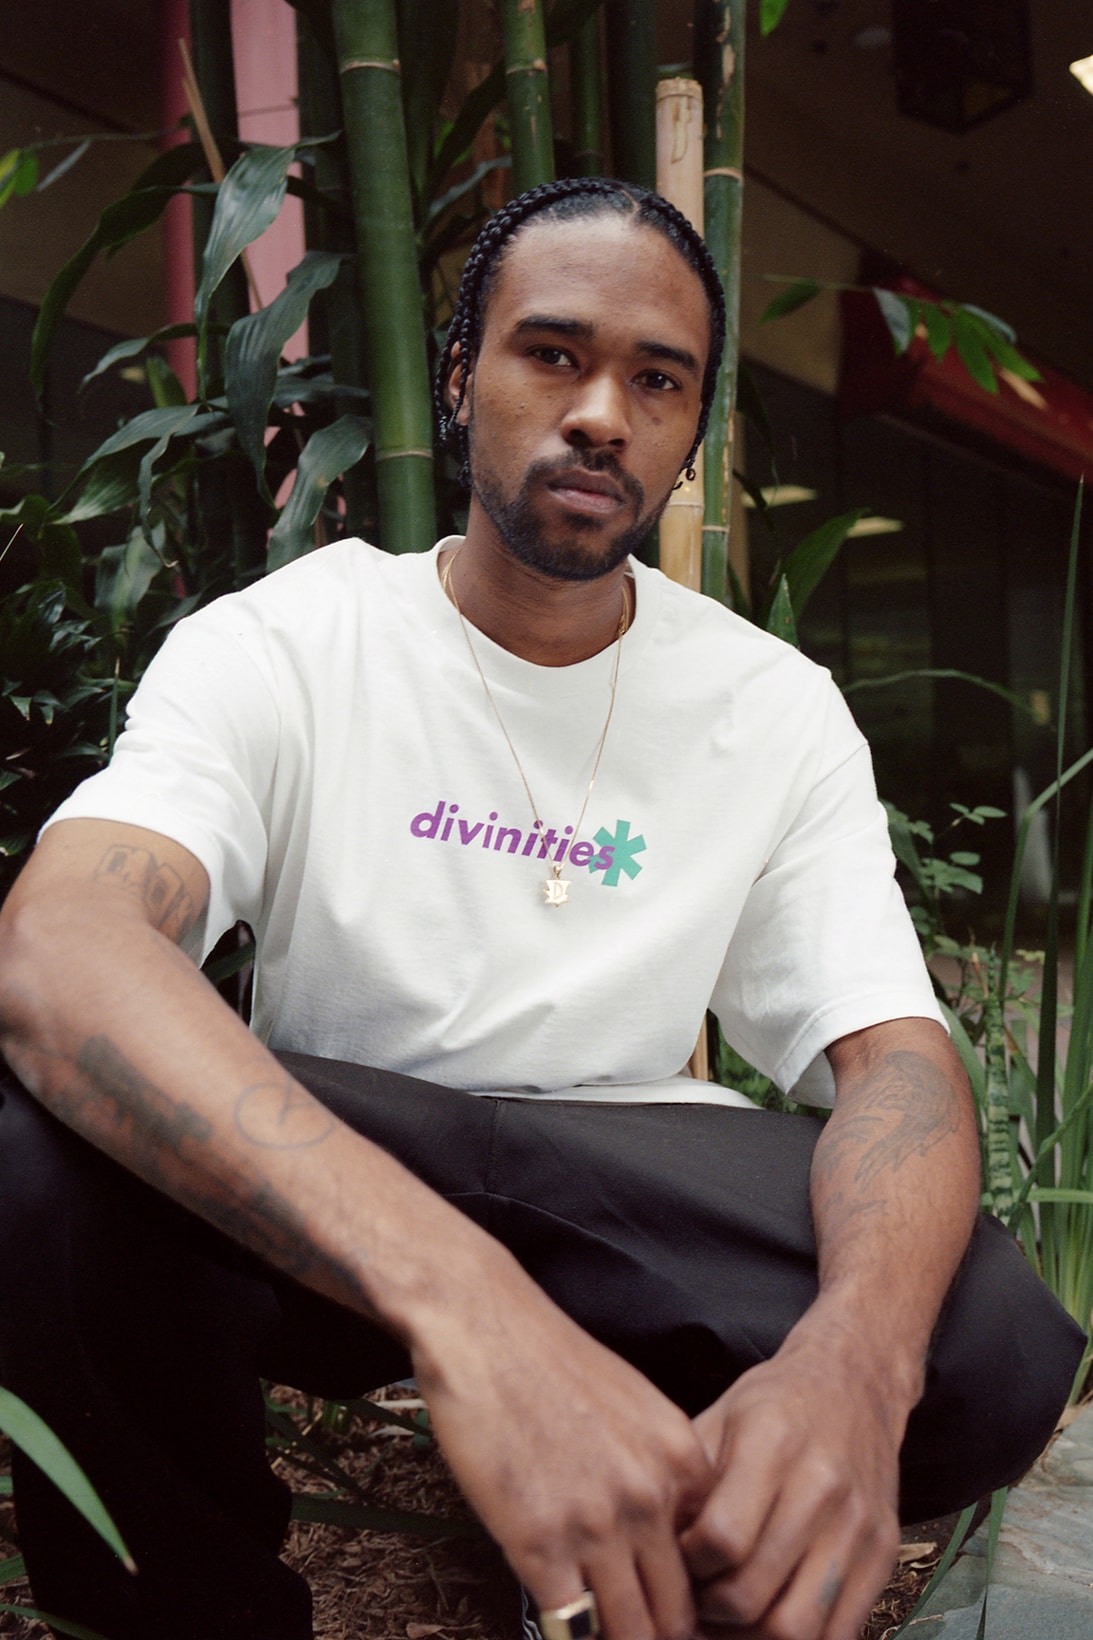 Divinities 2017 Fall Winter Second Delivery Drop Los Angles 2018 January 5 Release Drop Date Info HBX